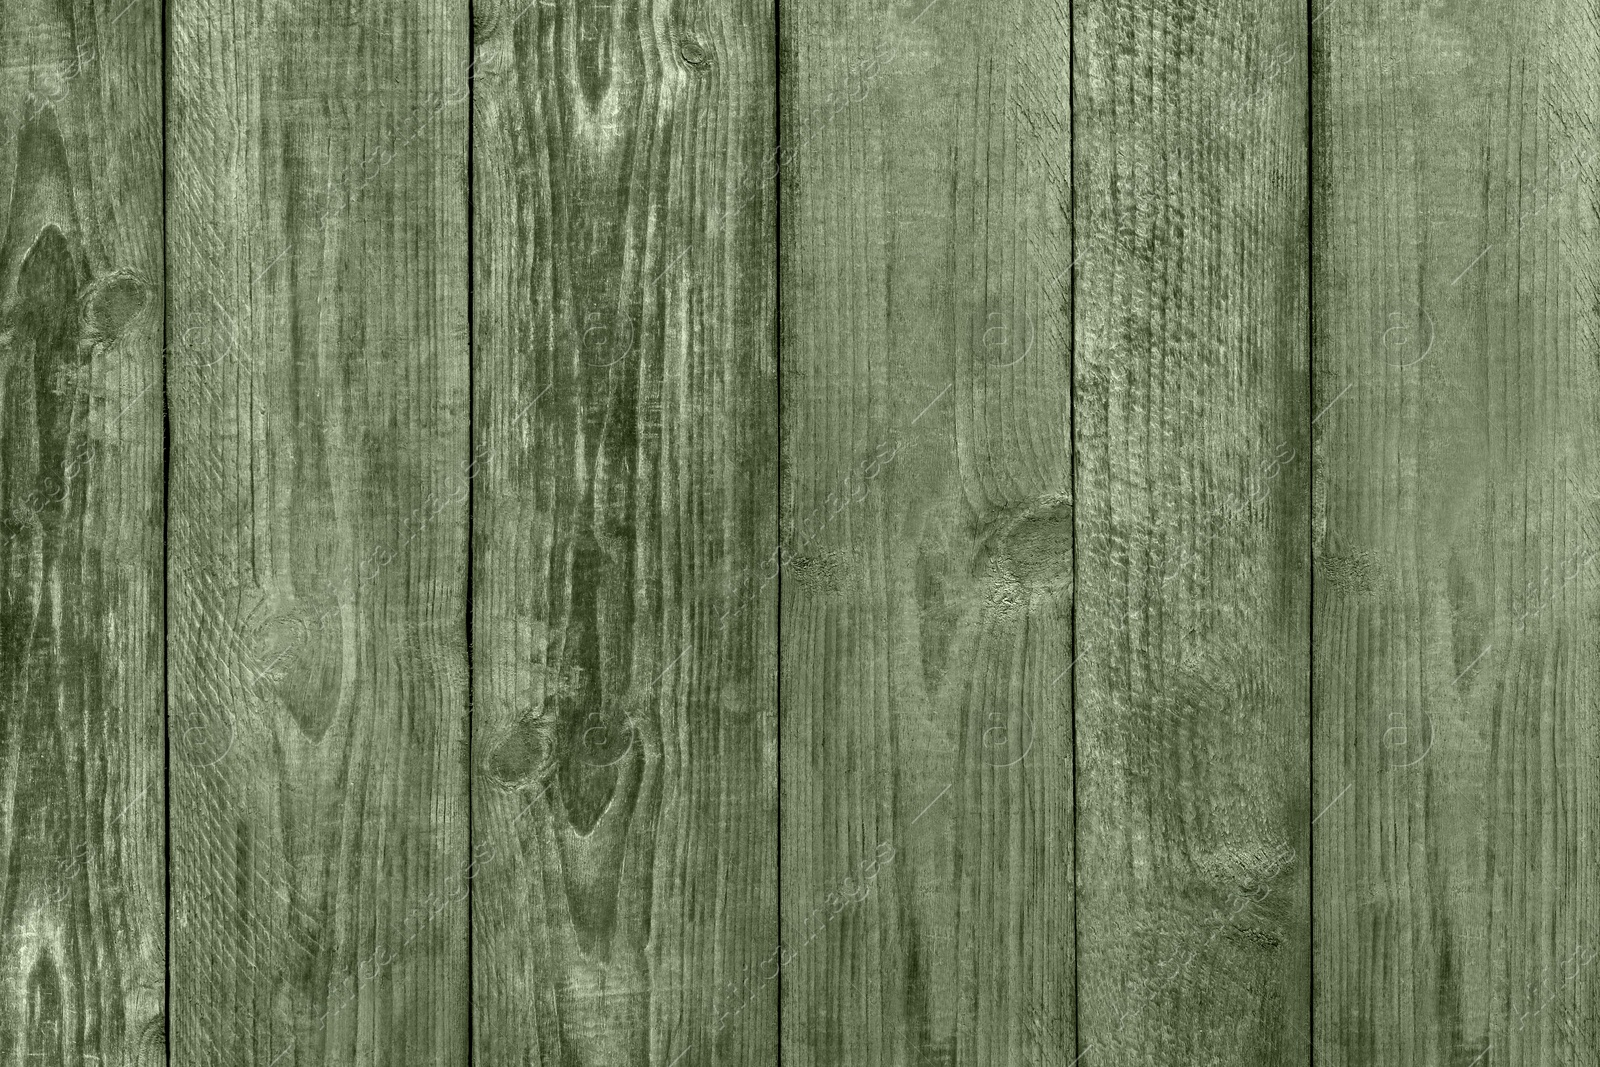 Image of Sage green wooden surface as background, closeup